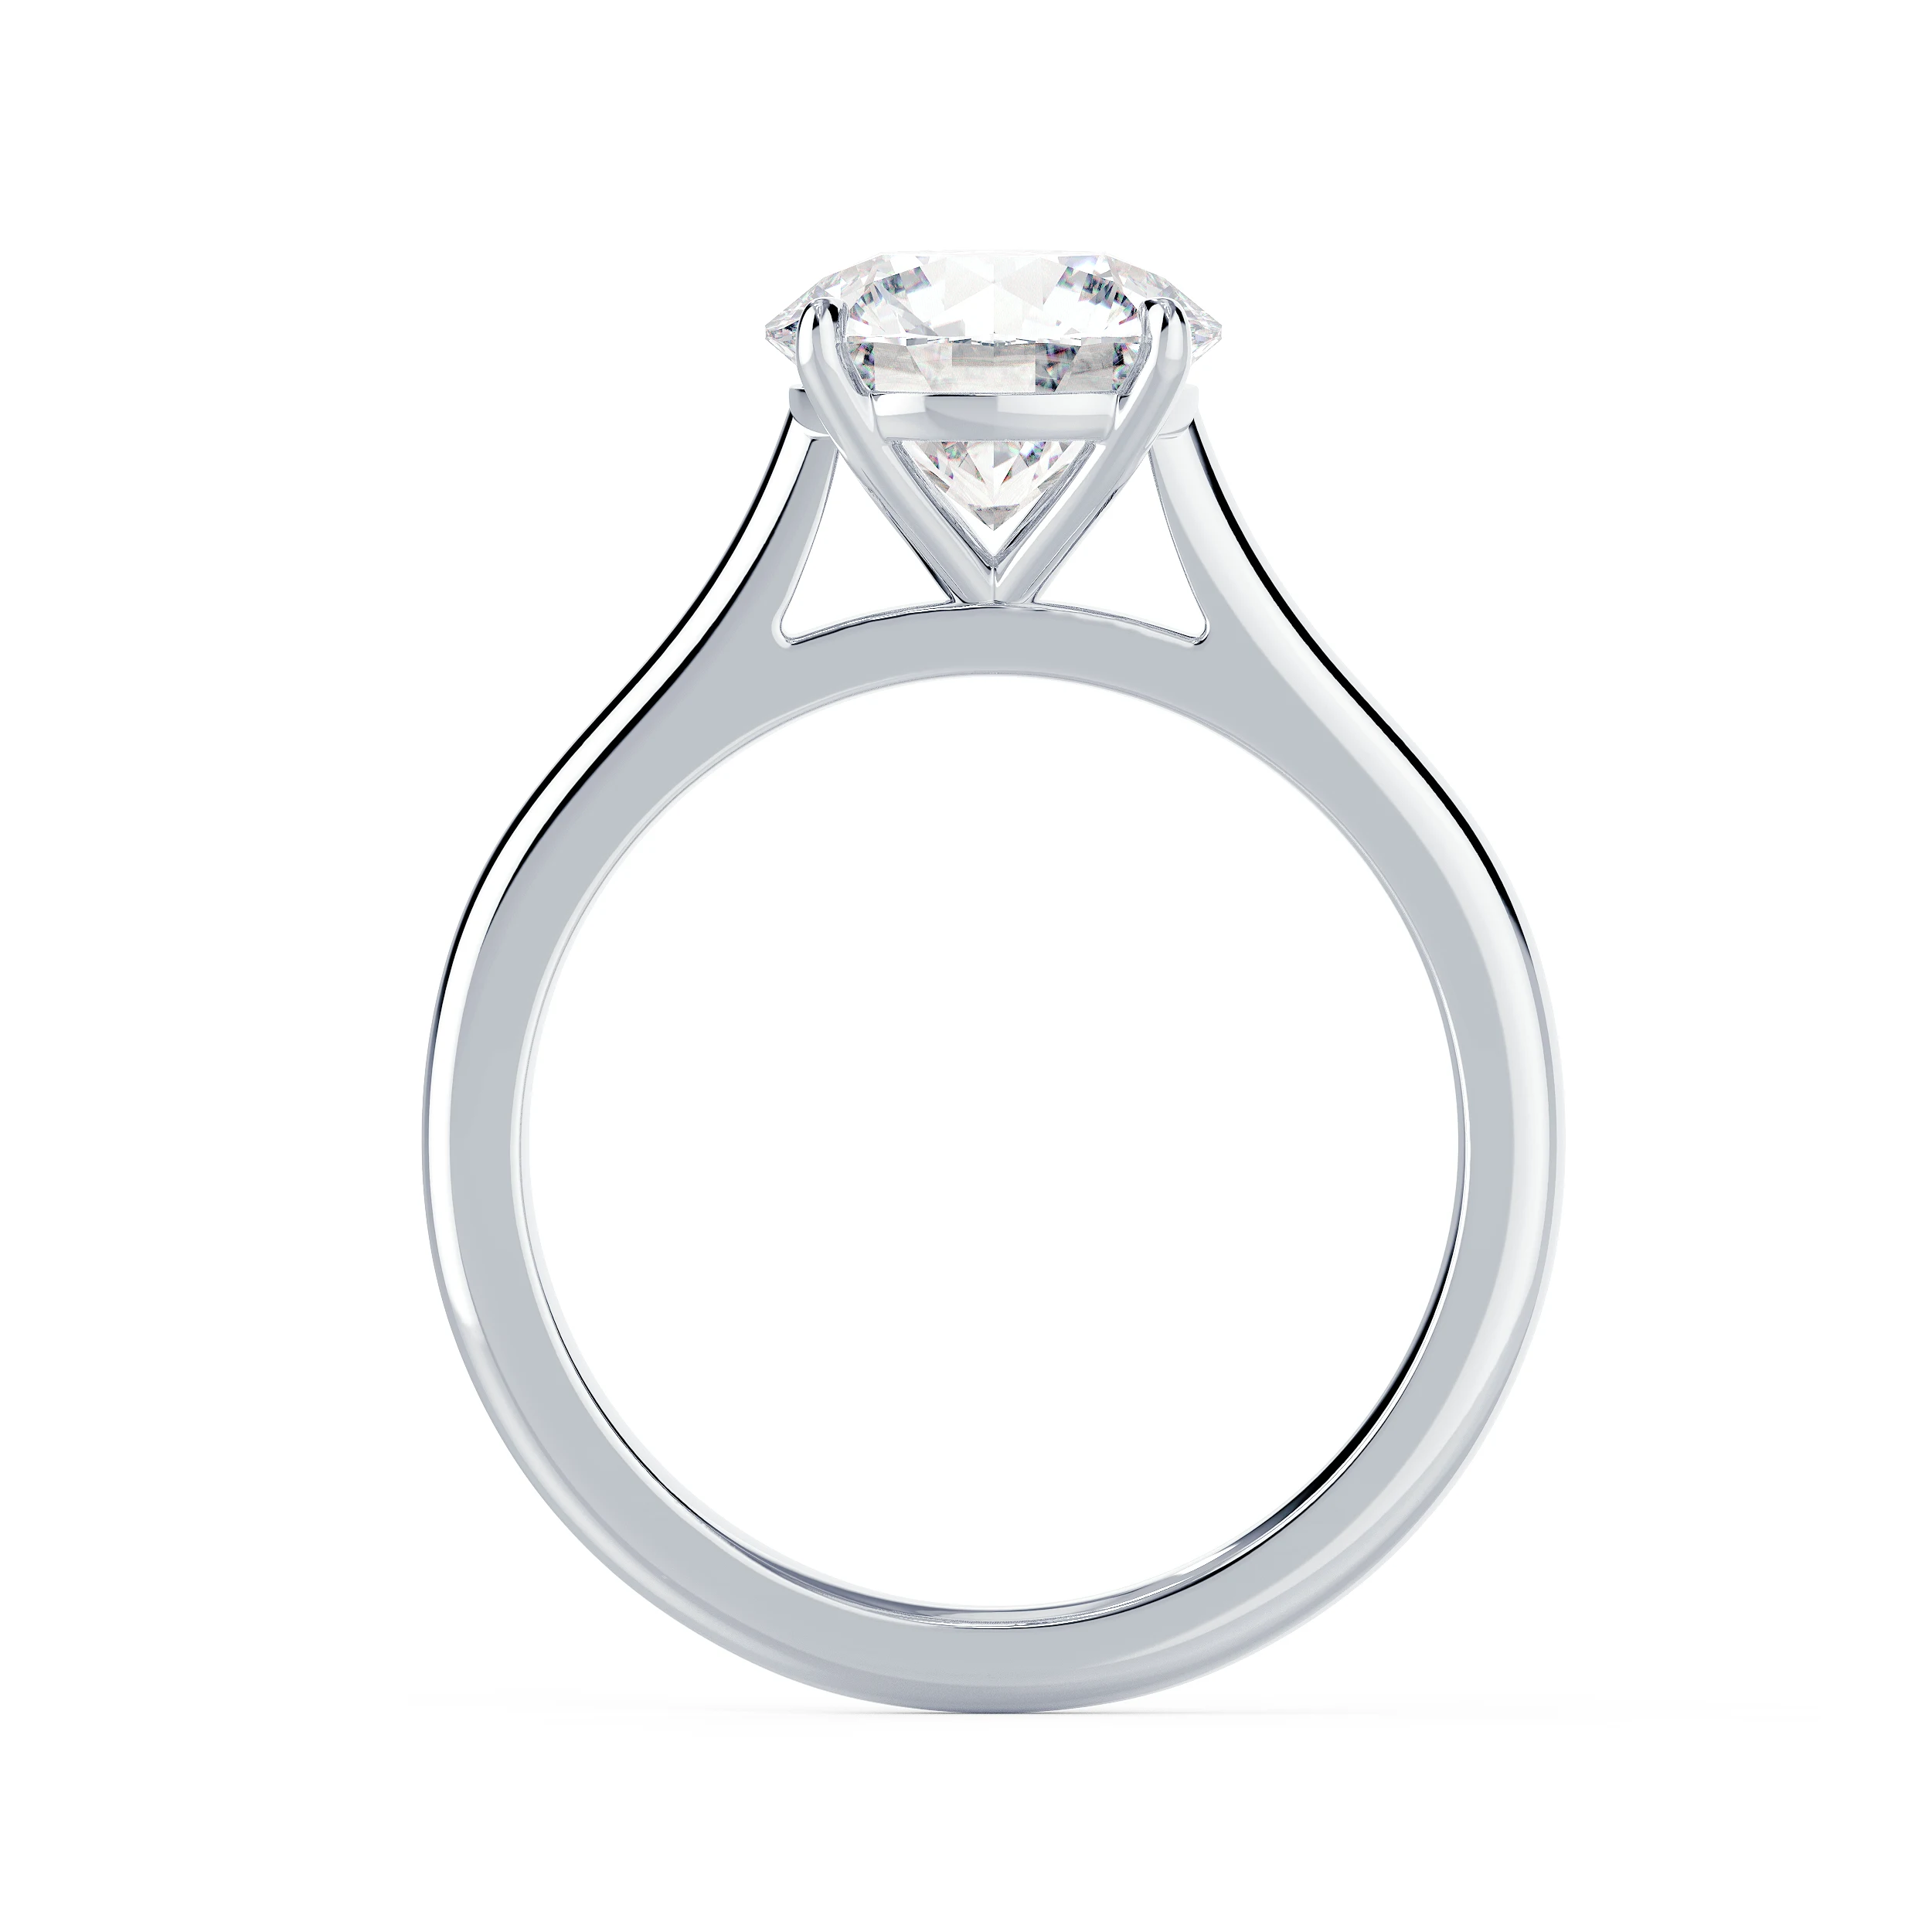 White Gold Round Cathedral Solitaire Diamond Engagement Ring featuring Lab Diamonds (Profile View)